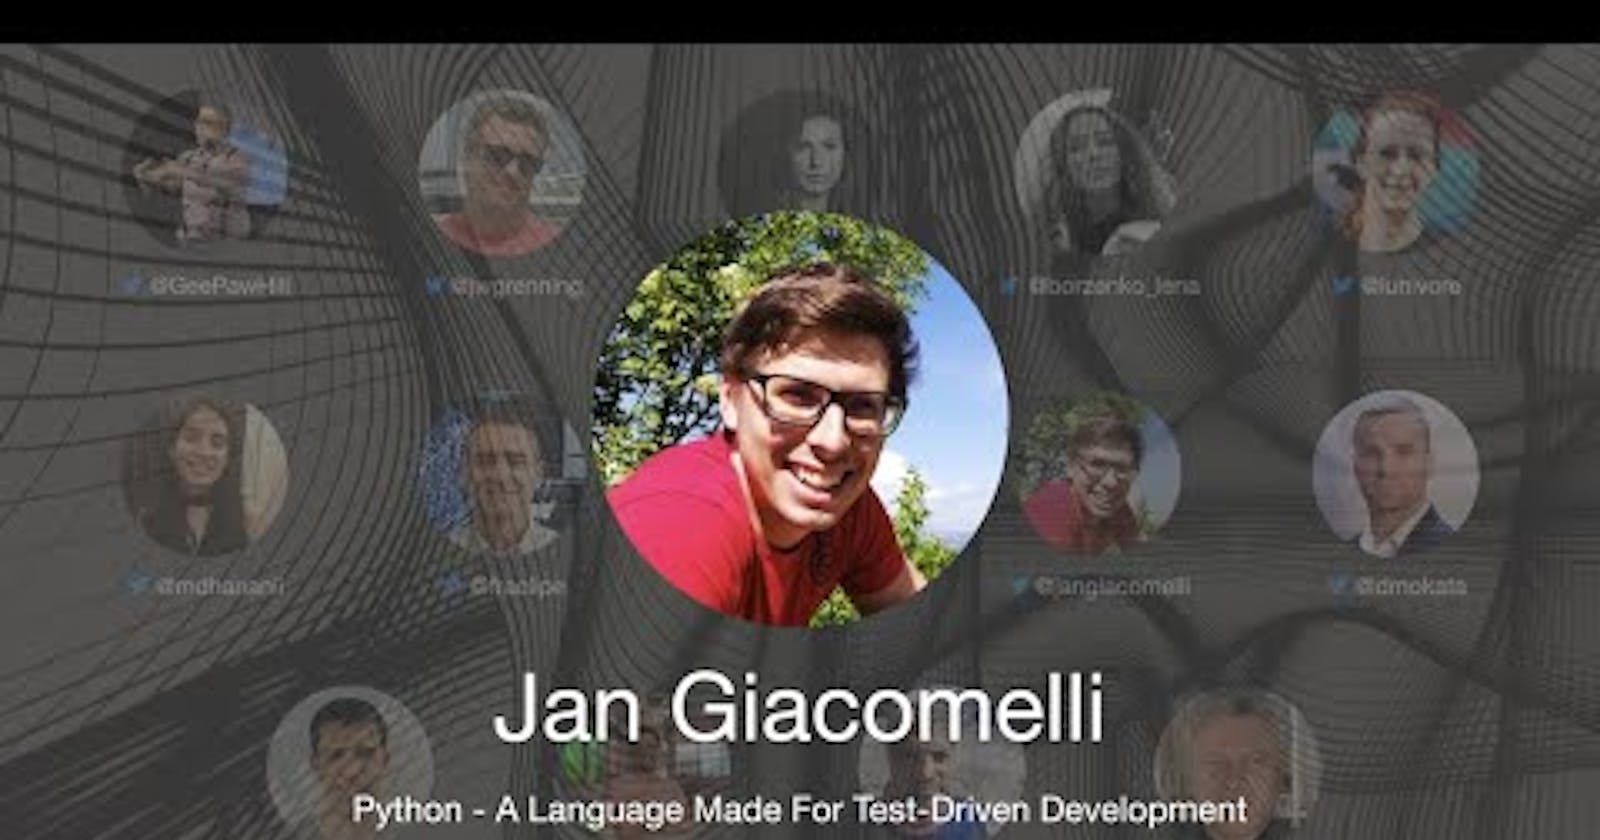 TDD Conference 2021 - Python - A Language Made For Test-Driven Development - Jan Giacomelli